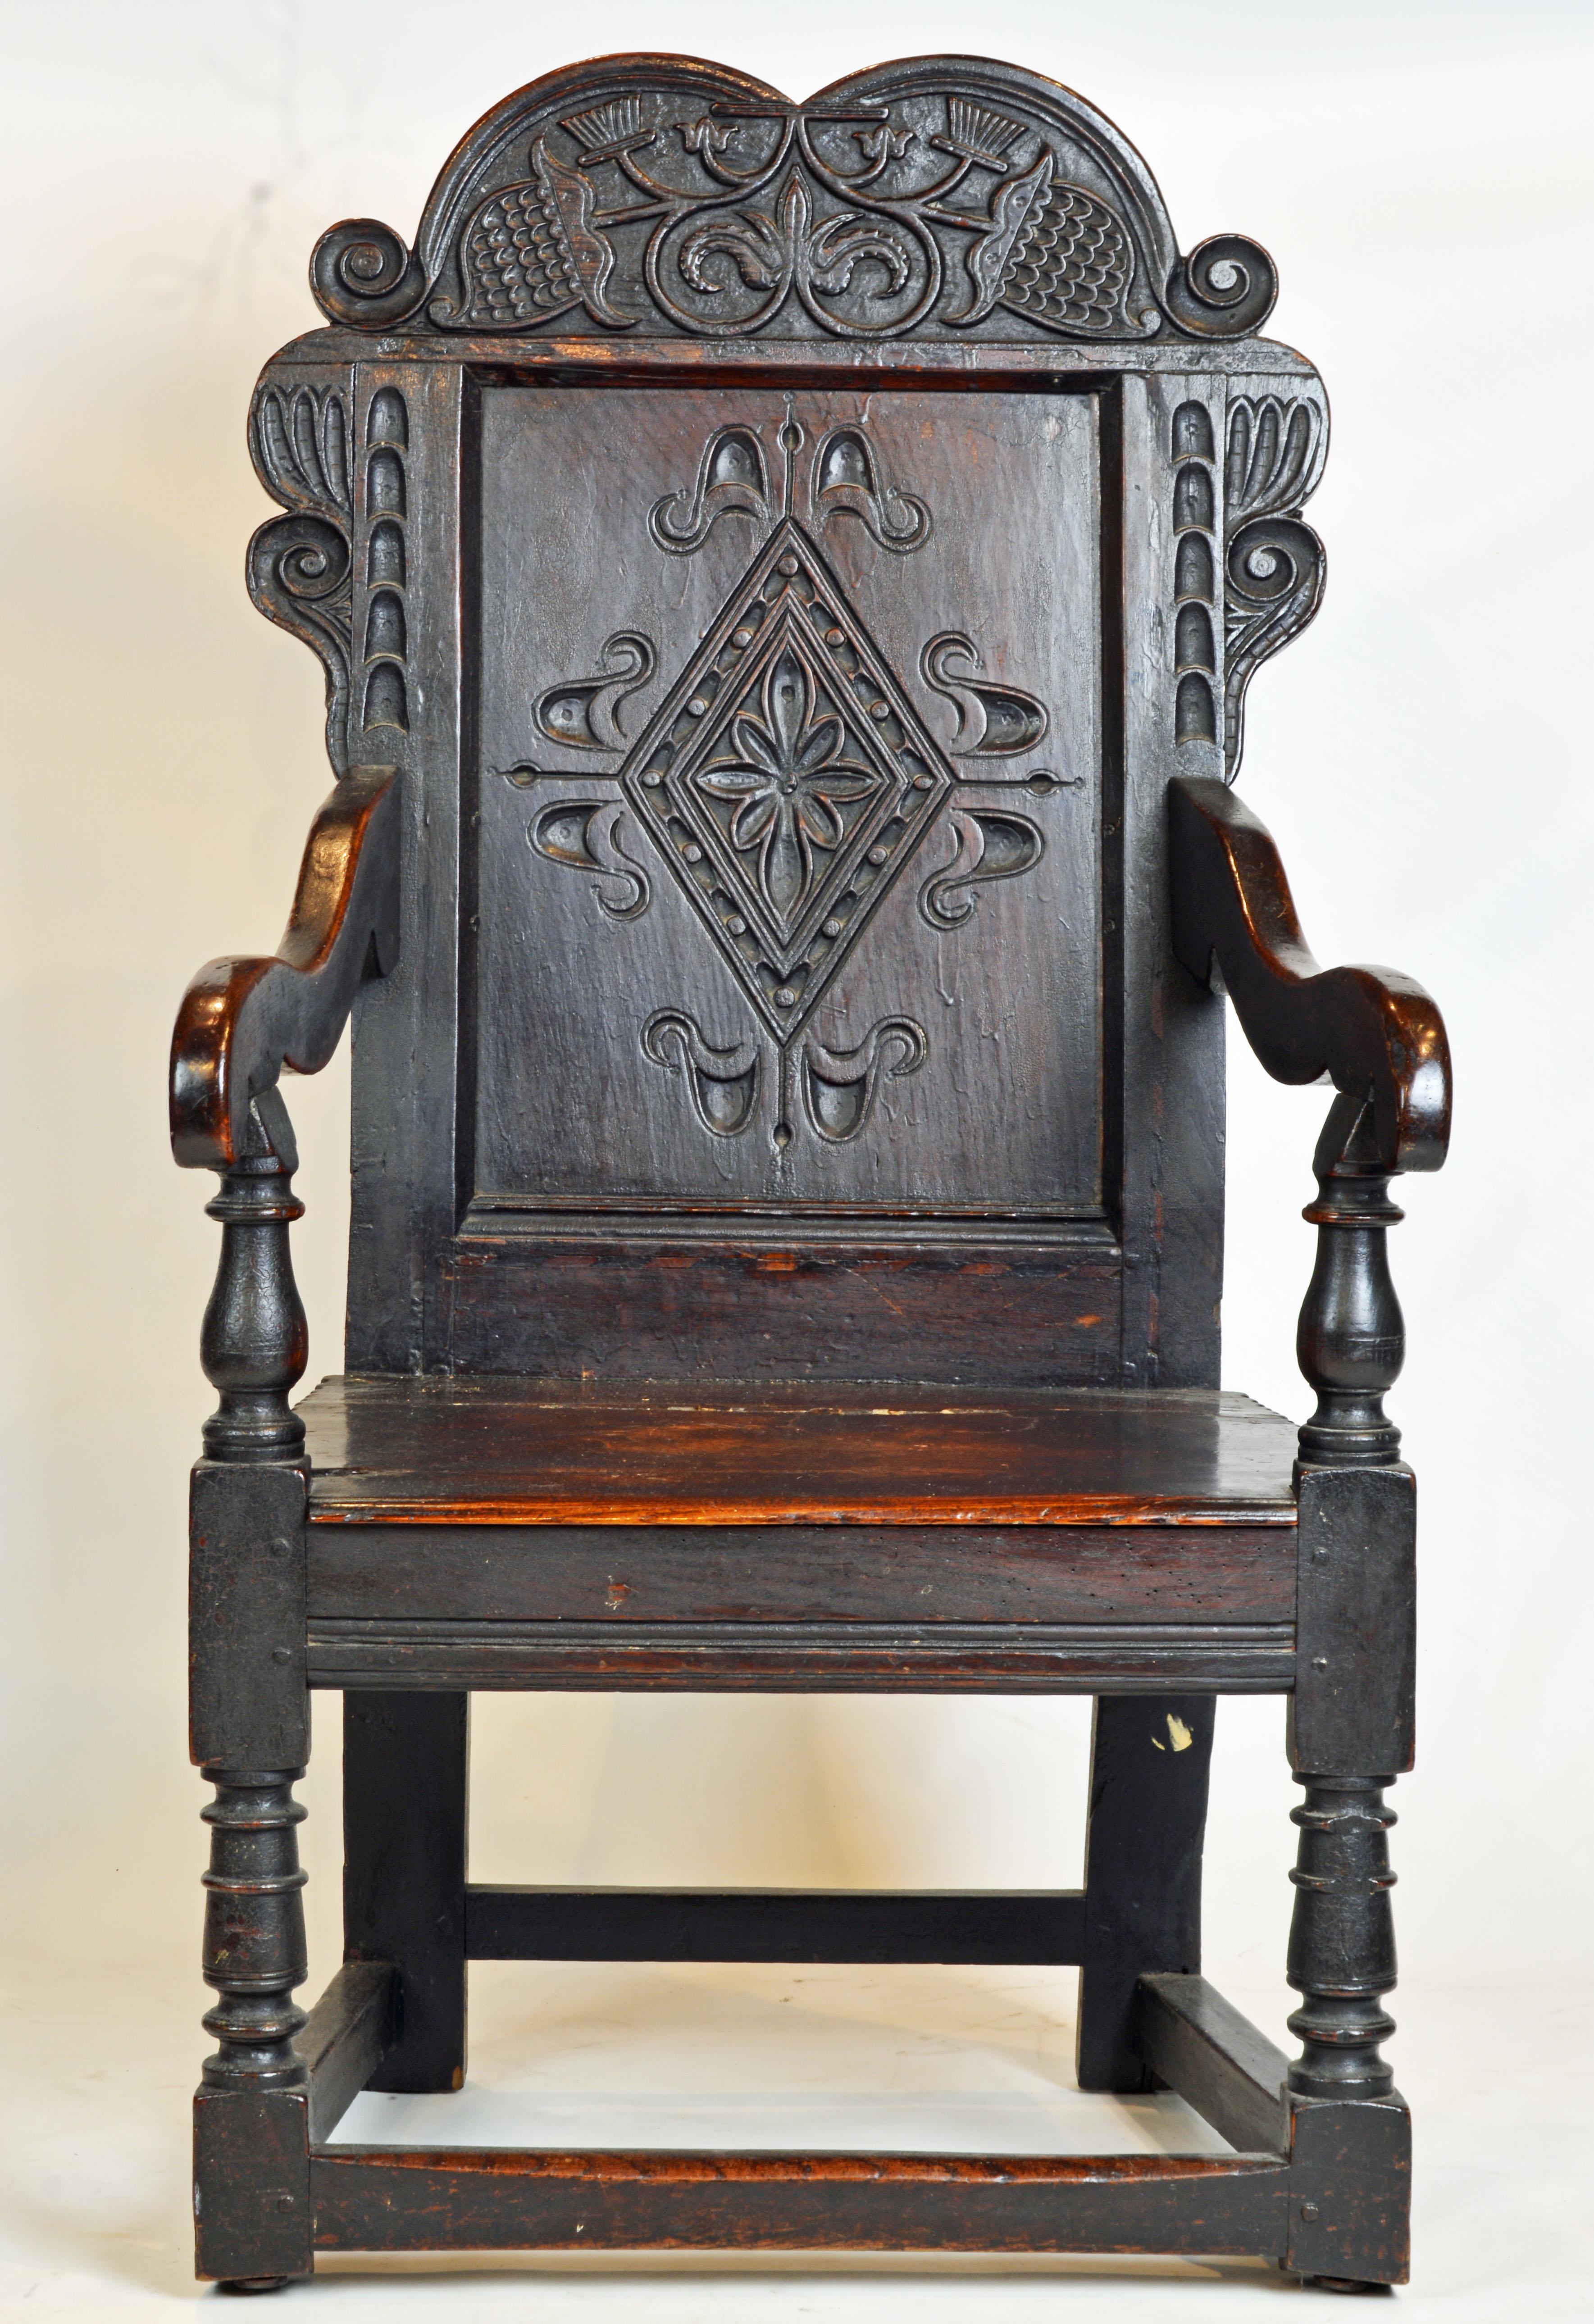 The style of this Elizabethan joined oak chair made in the mid-1600s is a descendant of the Tudor era Wainscot chairs only now without the boxed storage area beneath the seat. The front arm supports are baluster turned and protrude through the seat